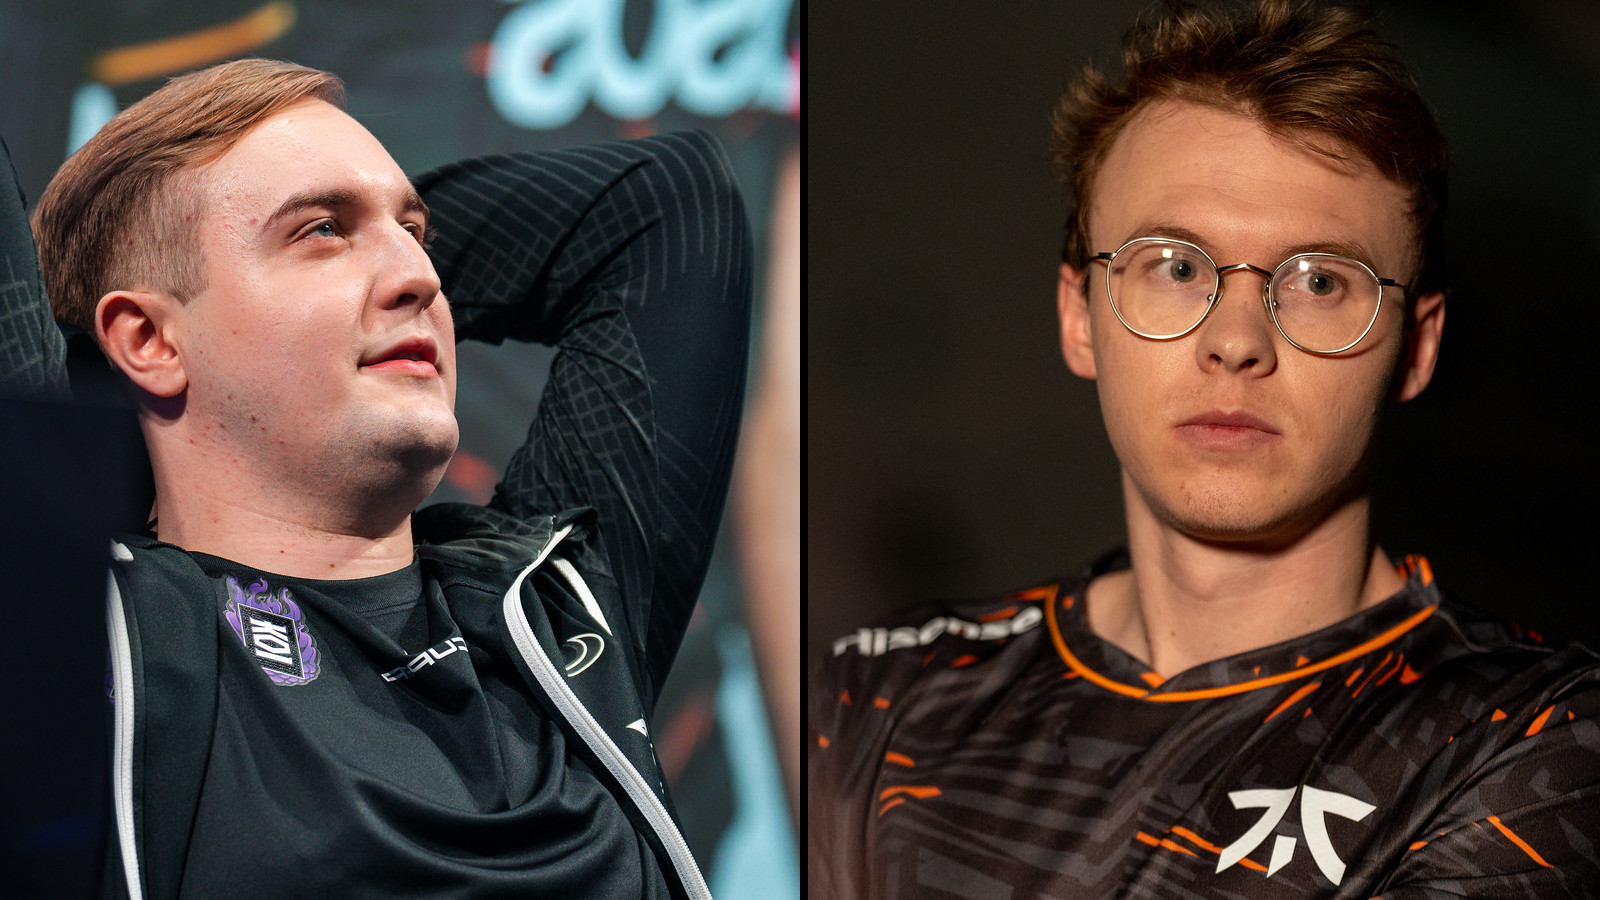 Fnatic and KOI reported to be trading support players in LEC roster shuffle – Egaxo